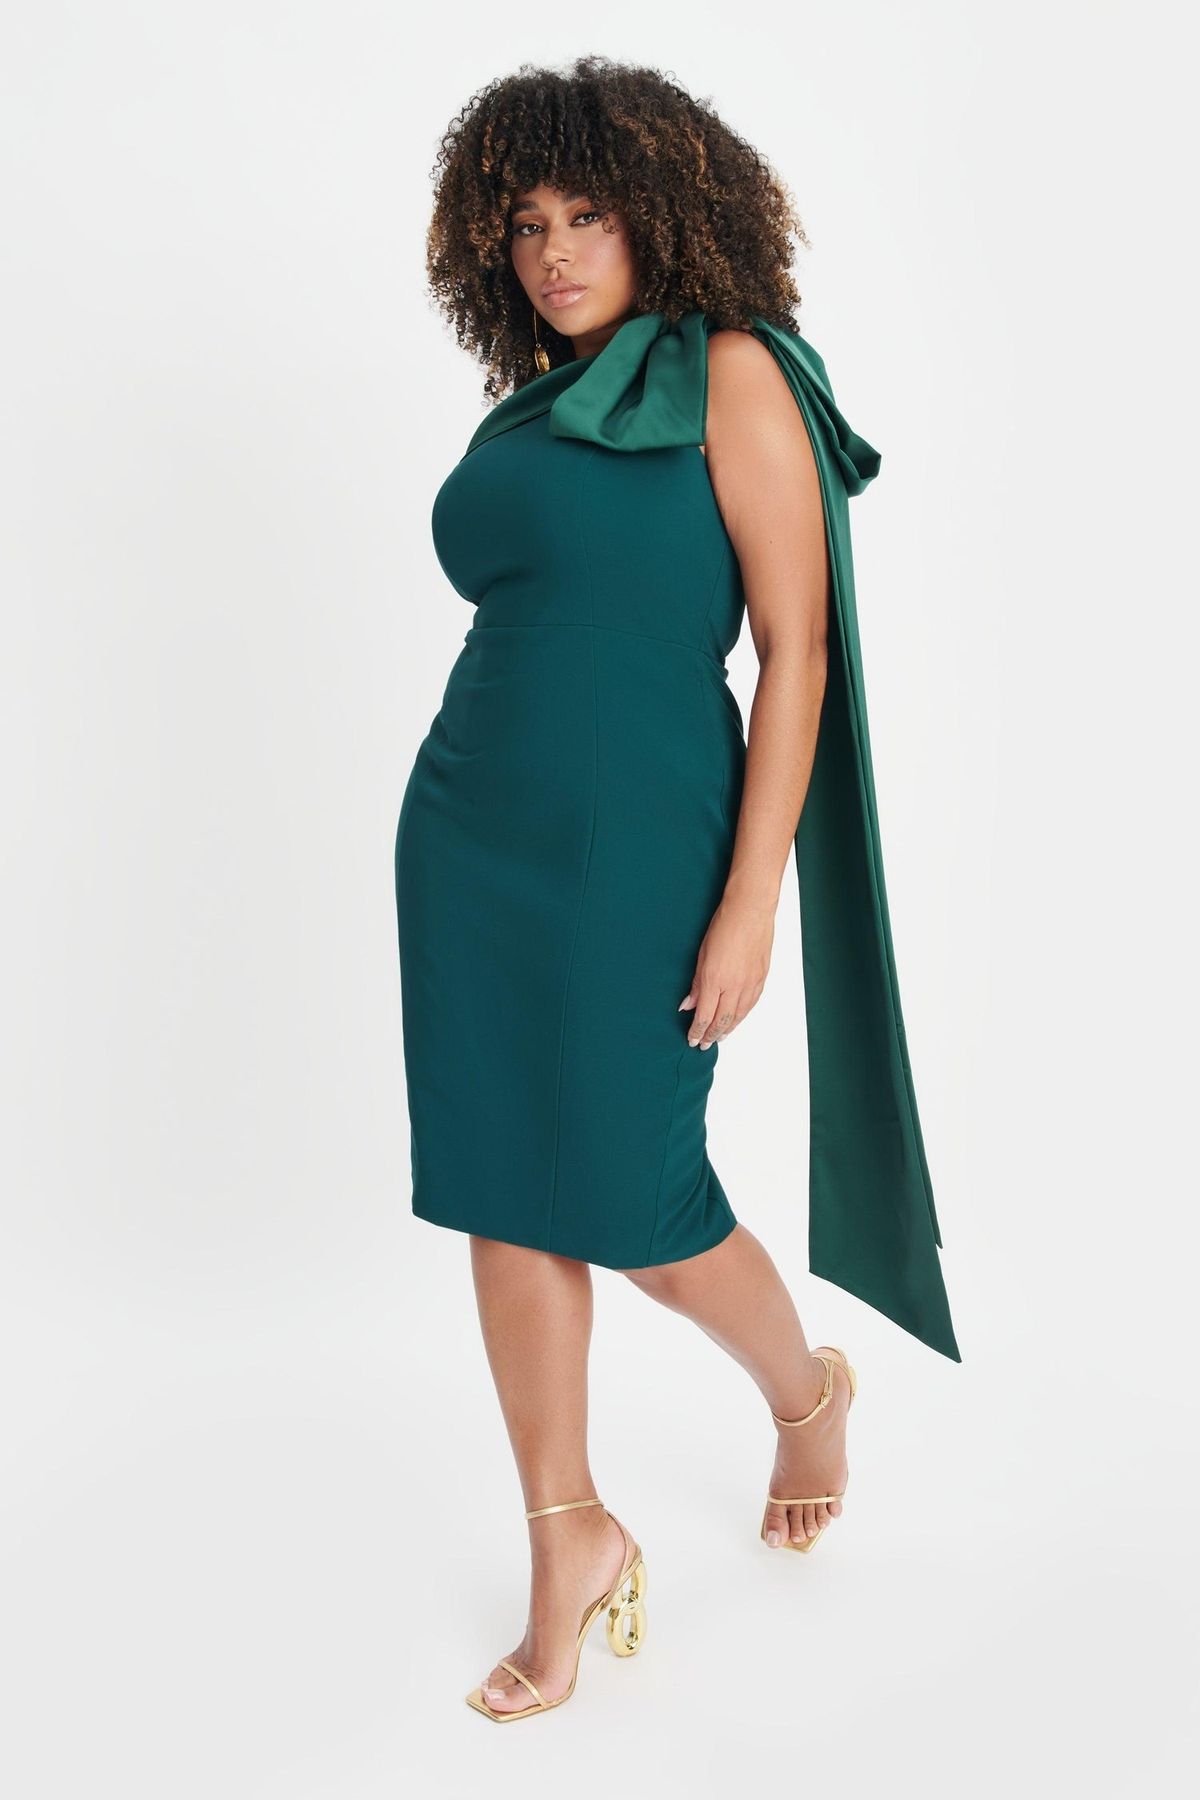 Style GEMMA Lavish Alice Plus Size 22 One Shoulder Emerald Green Cocktail Dress on Queenly